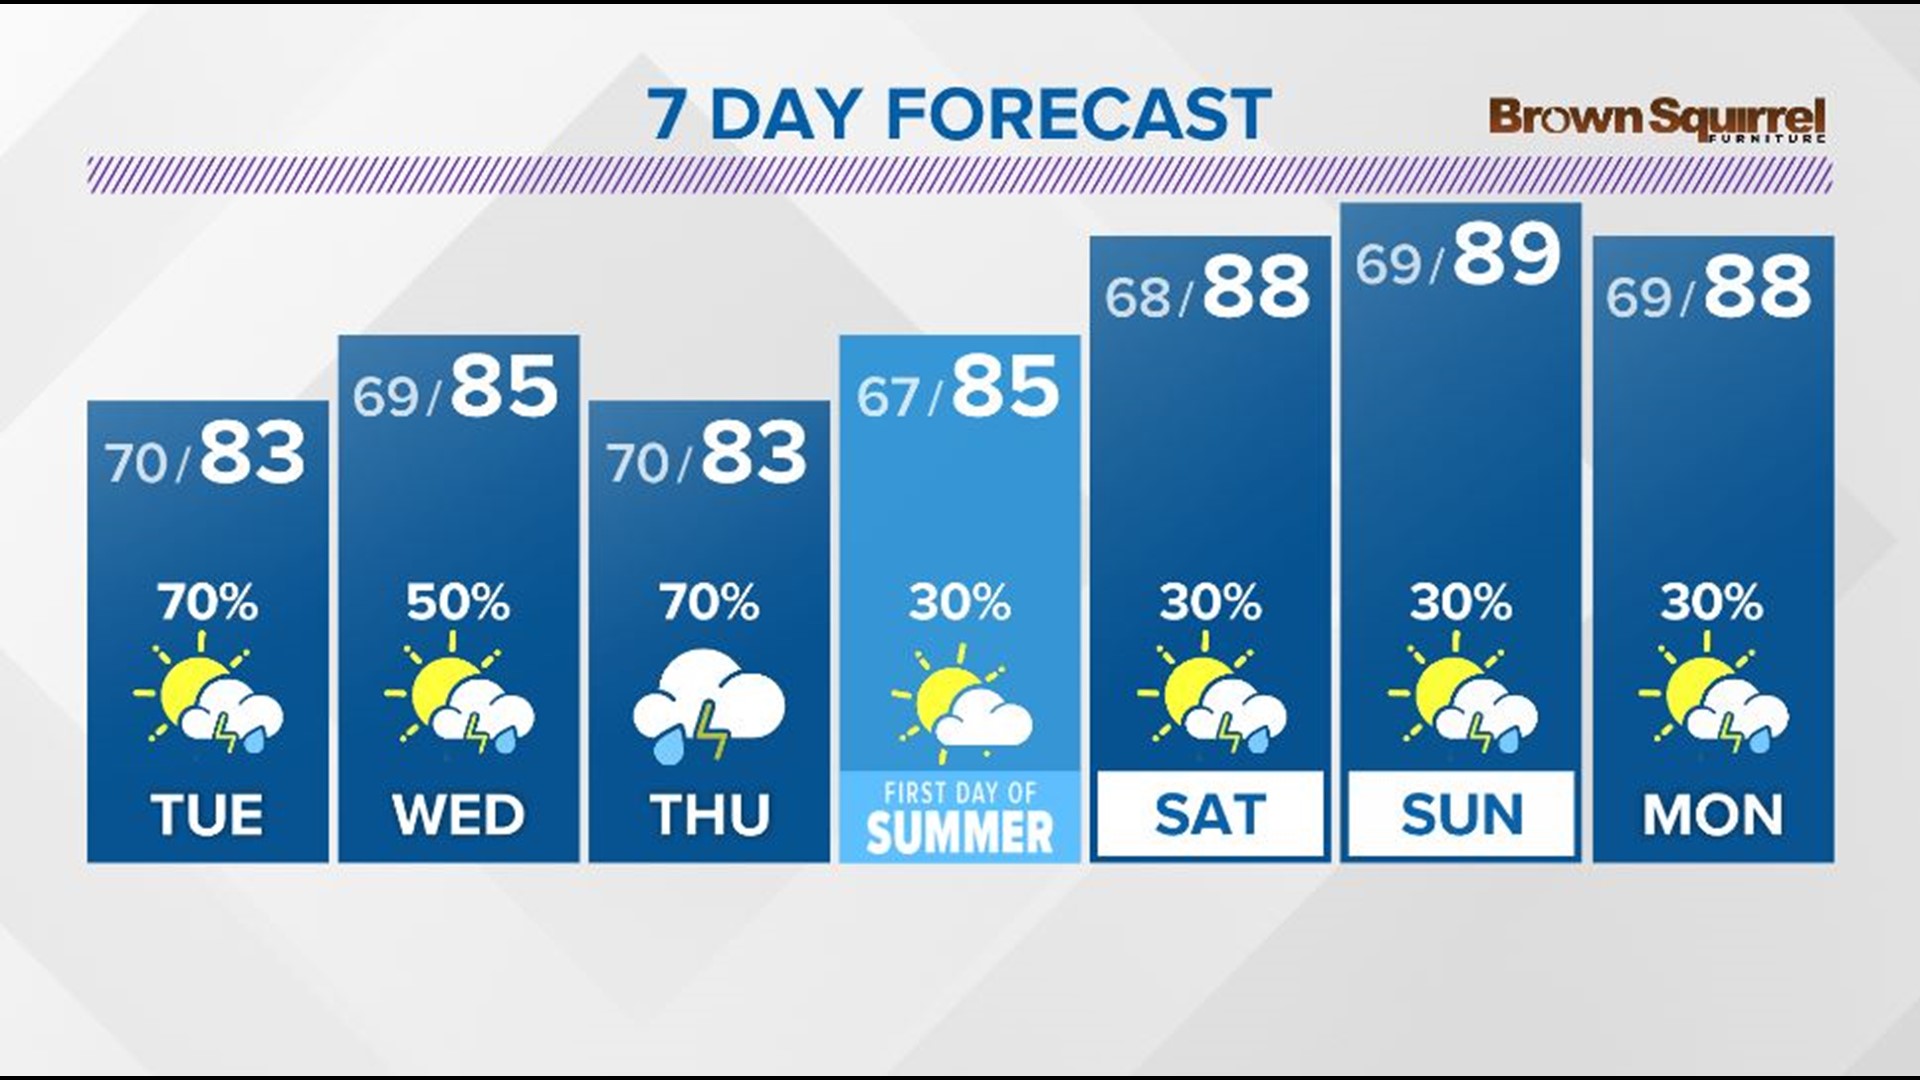 An active pattern will keep rain chances elevated through Thursday